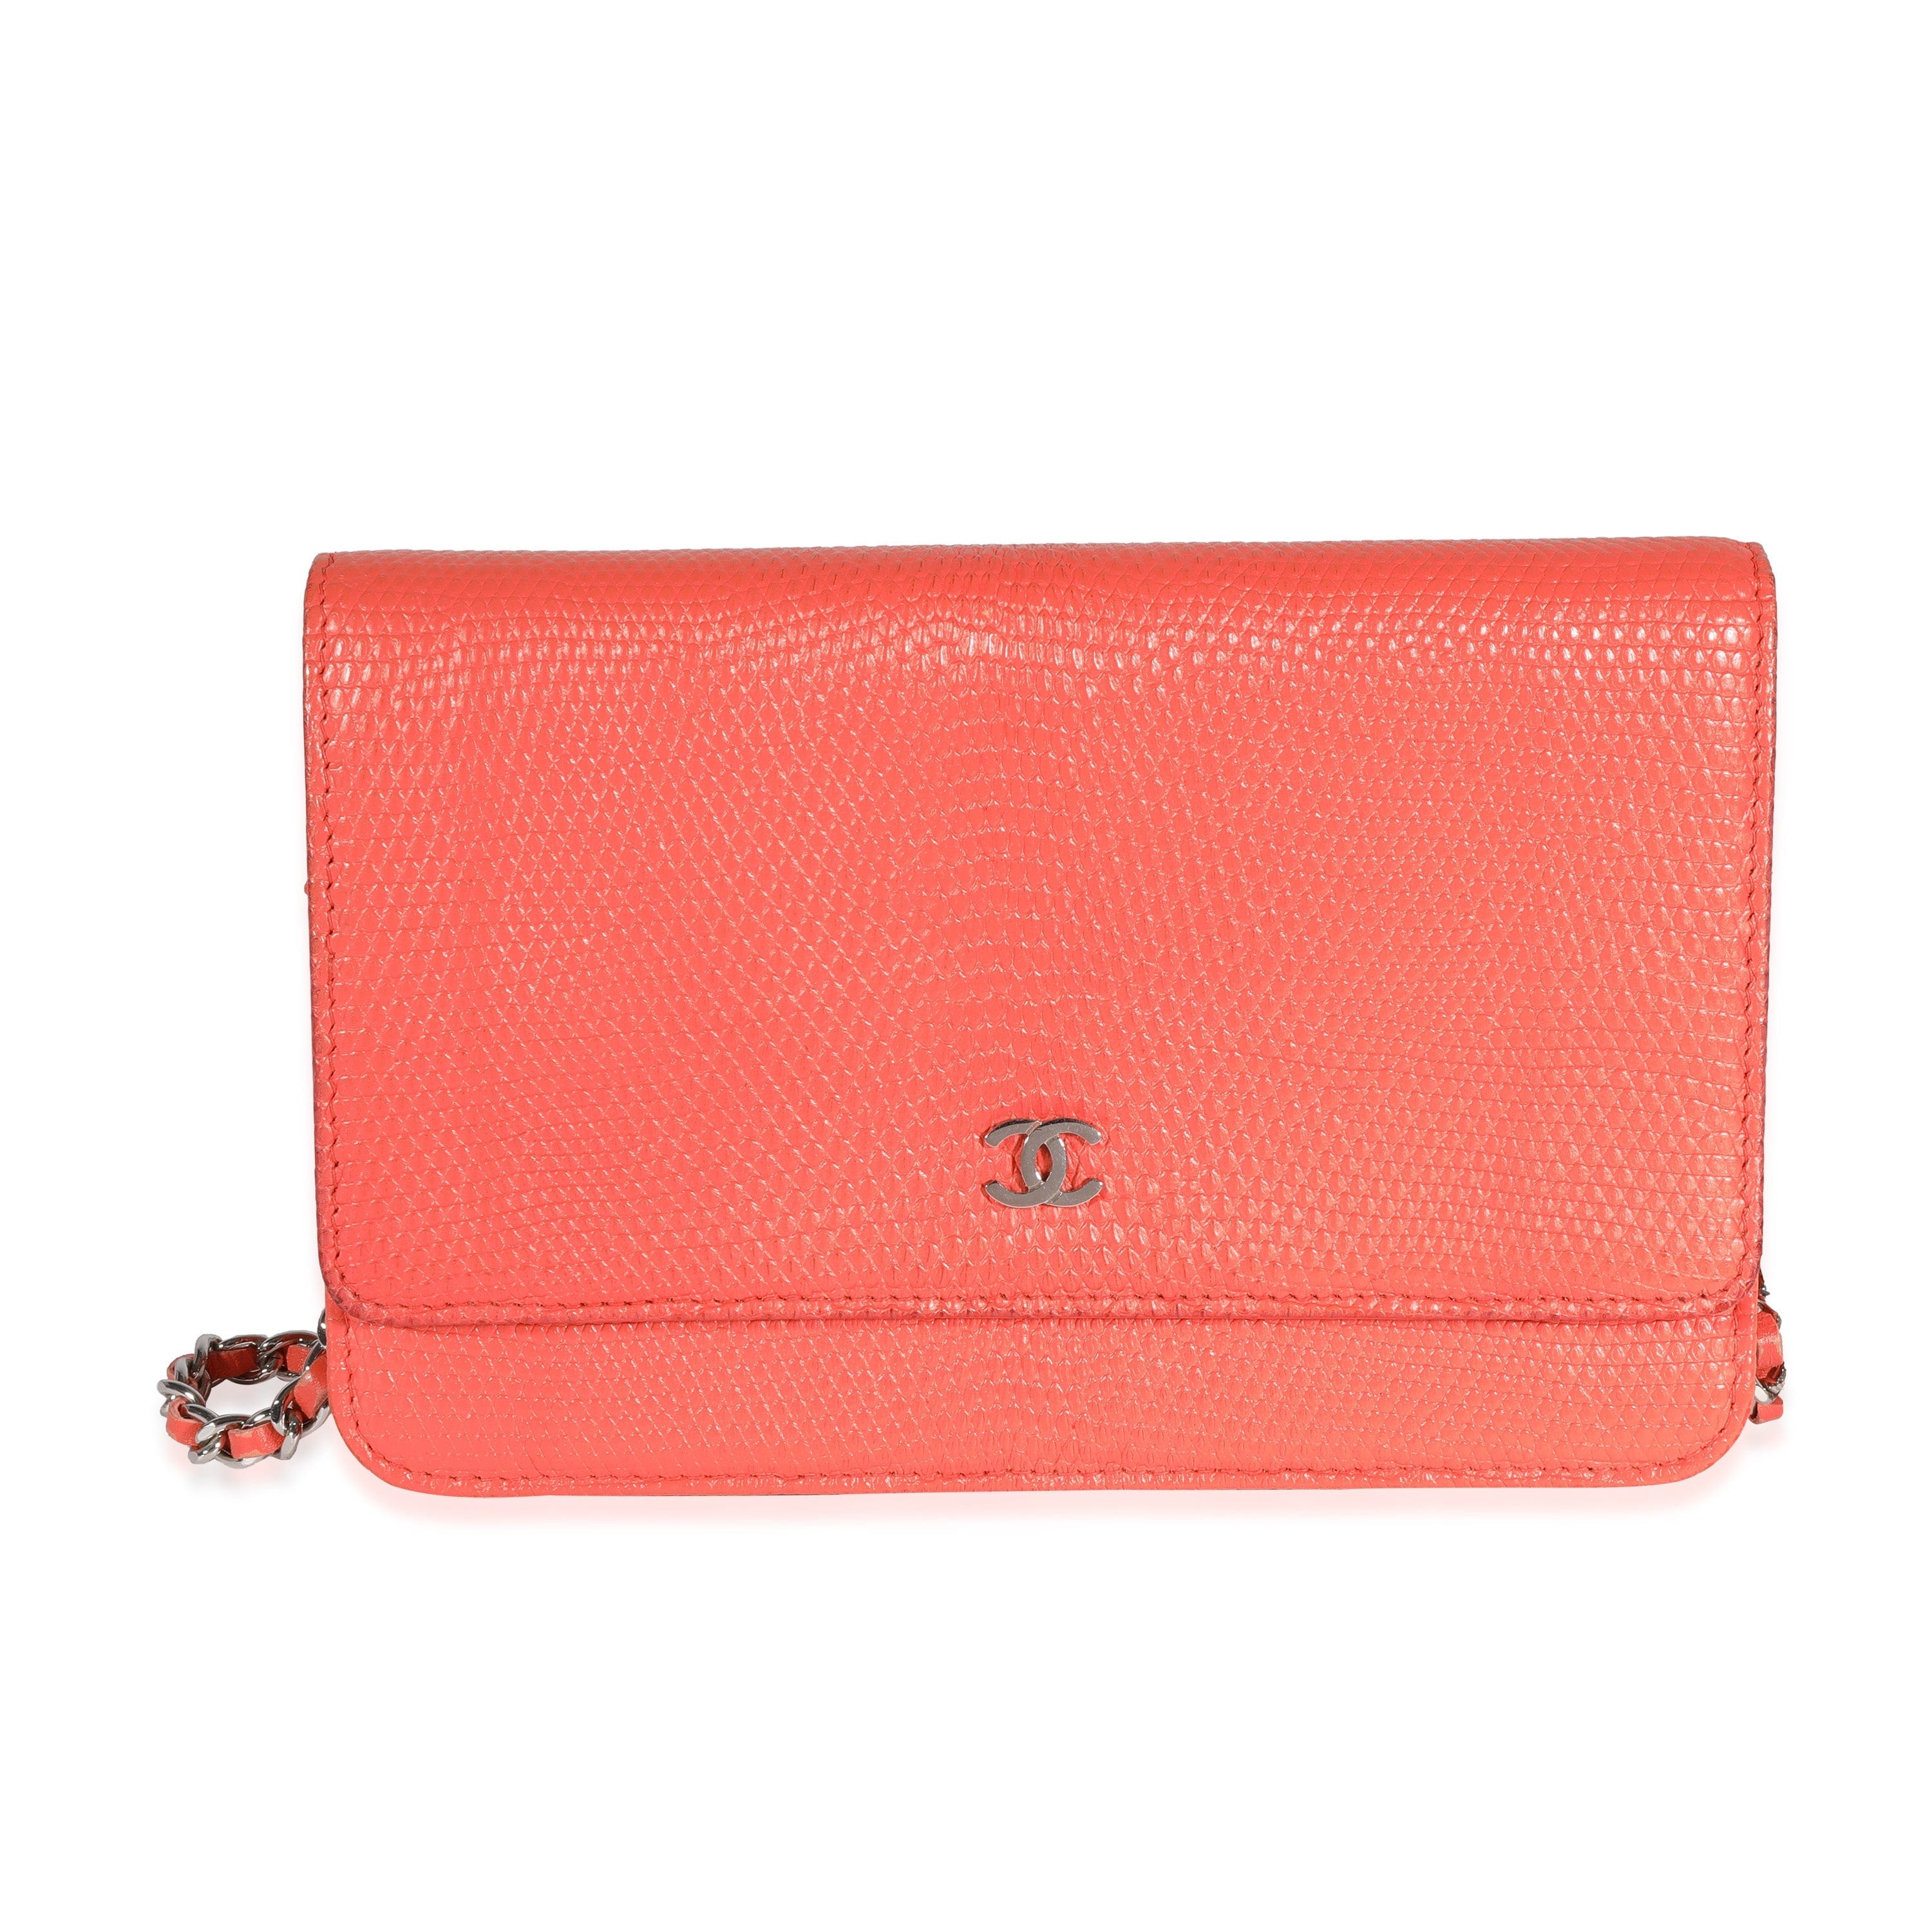 Chanel Chanel Coral Lizard Wallet On Chain